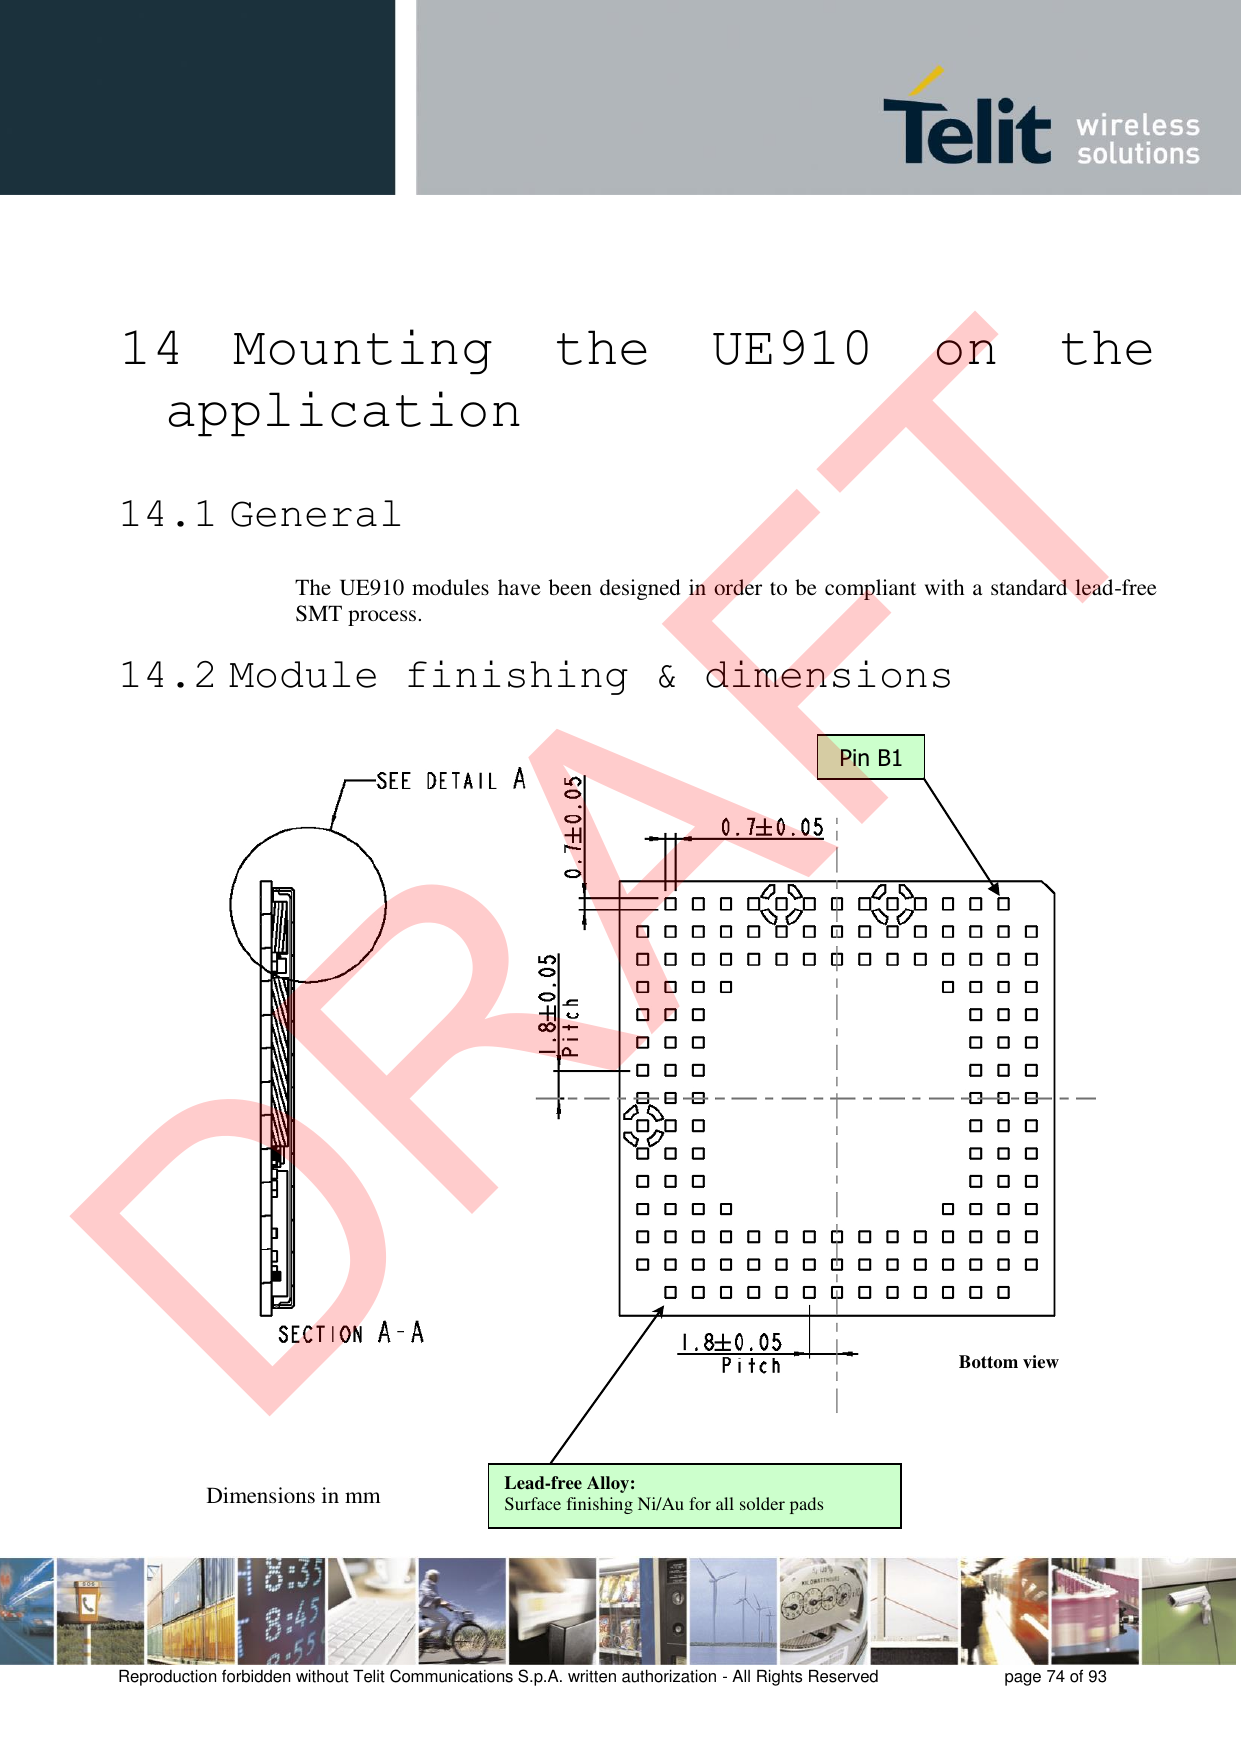 Reproduction forbidden without Telit Communications S.p.A. written authorization - All Rights Reserved  page 74 of 93 14  Mounting  the  UE910  on  the application 14.1 General The UE910 modules have been designed in order to be compliant with a standard lead-free SMT process. 14.2 Module finishing &amp; dimensions Pin B1 Dimensions in mm Bottom view Lead-free Alloy: Surface finishing Ni/Au for all solder pads DRAFT